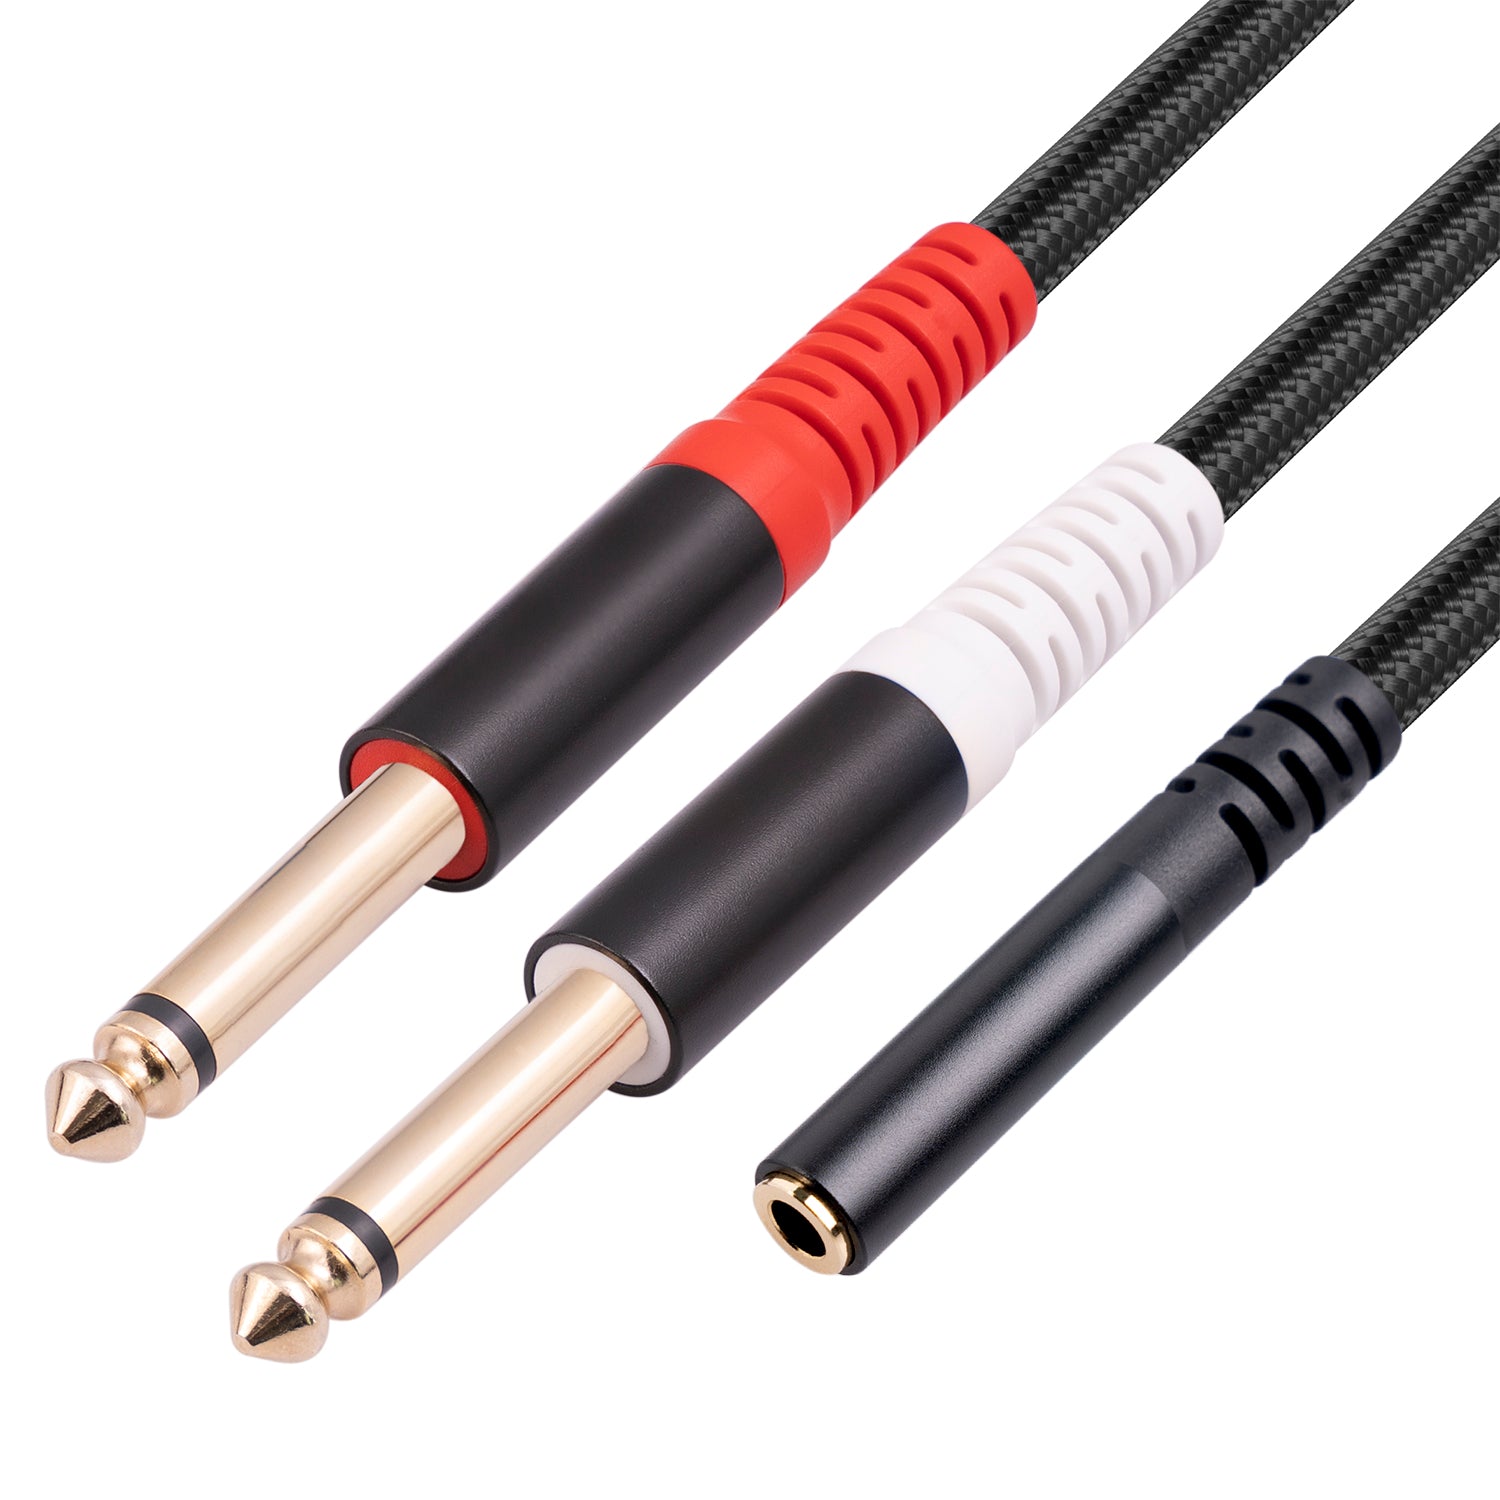 3717 0.3m 3.5mm Female to 2x 6.35mm 1 / 4 inch TS Mono Male Jack Audio Adapter Cable